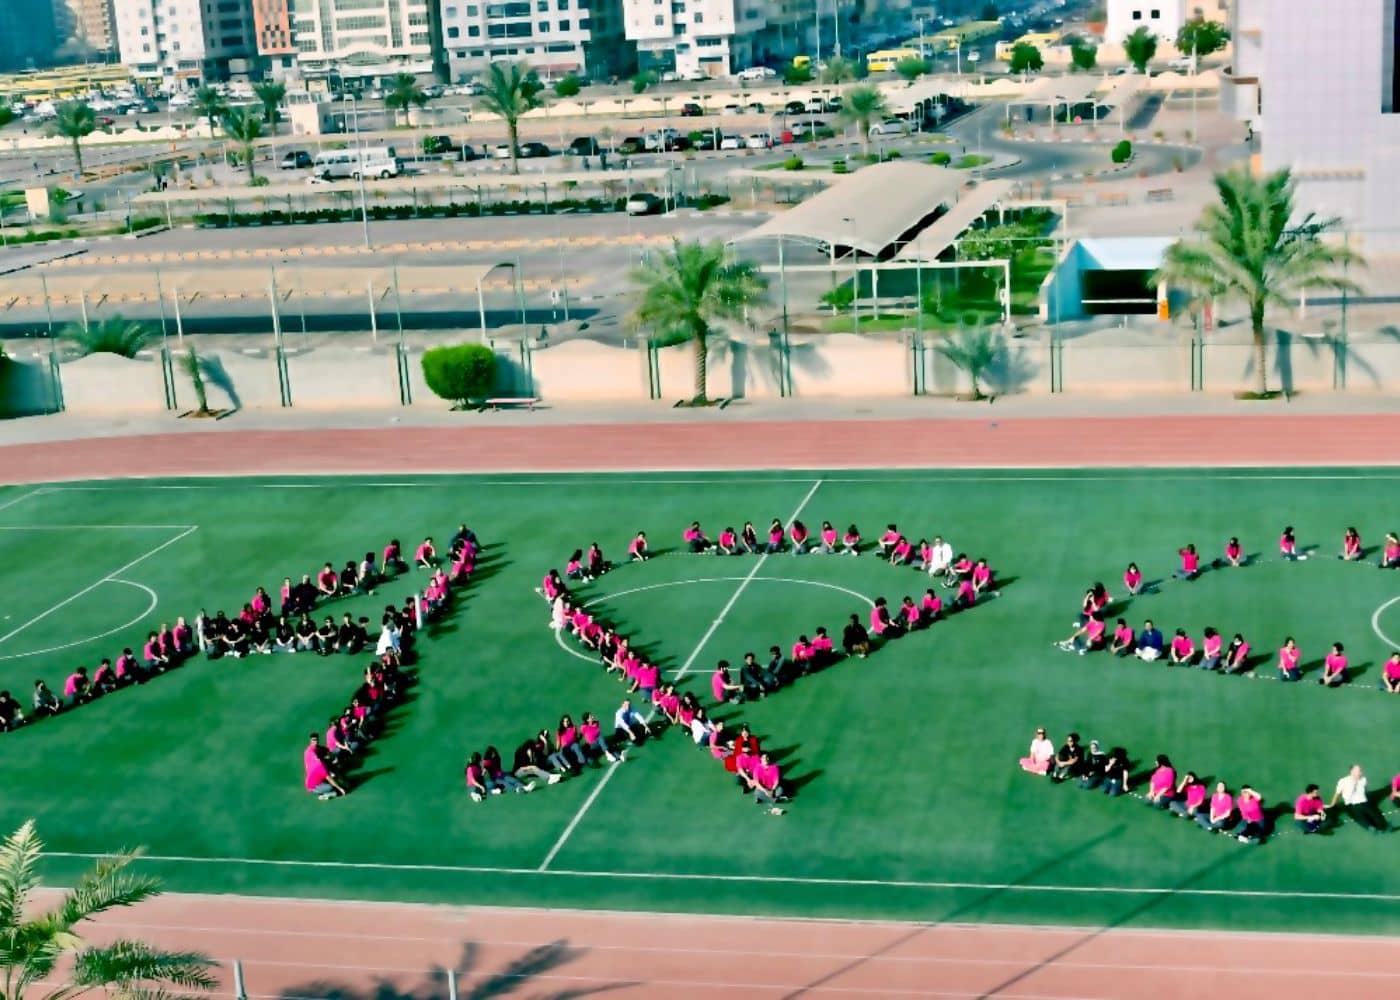 Students of Abu Dhabi International School at the Cancer Awareness event